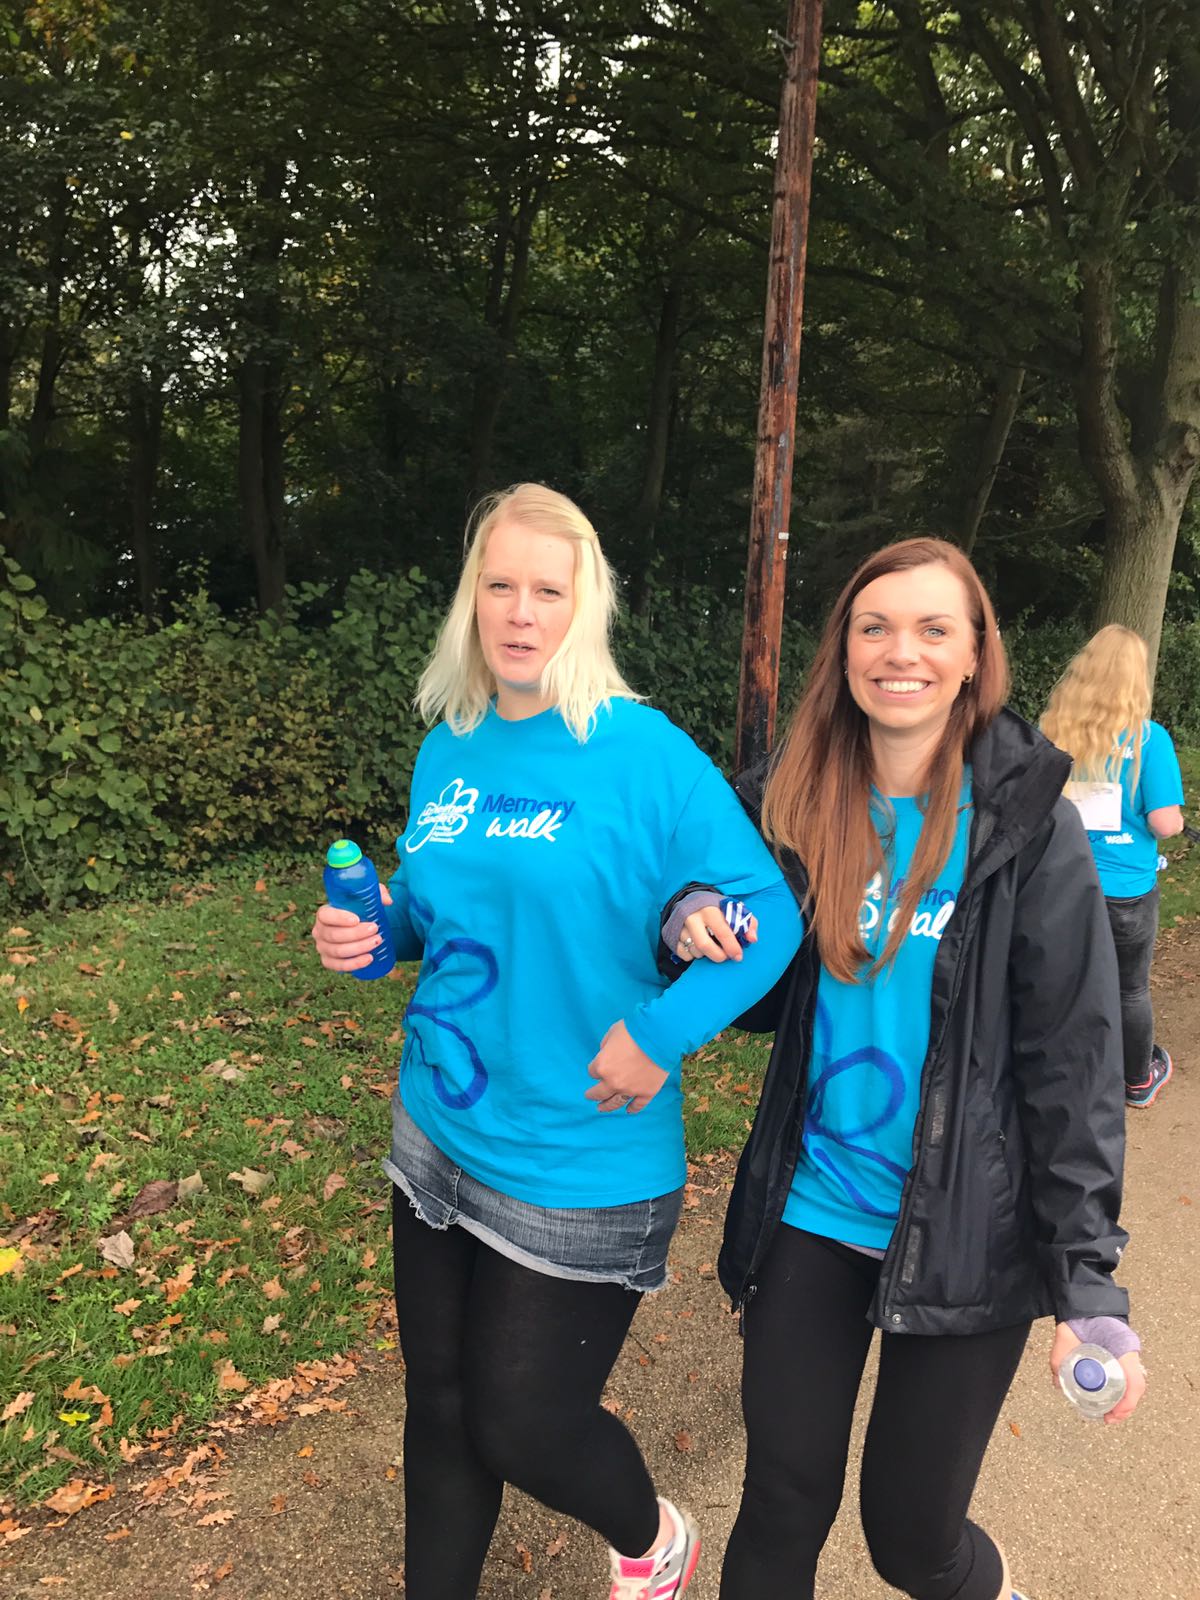 A group of women walking and wearing matching shirts for alzheimer's society memory walk